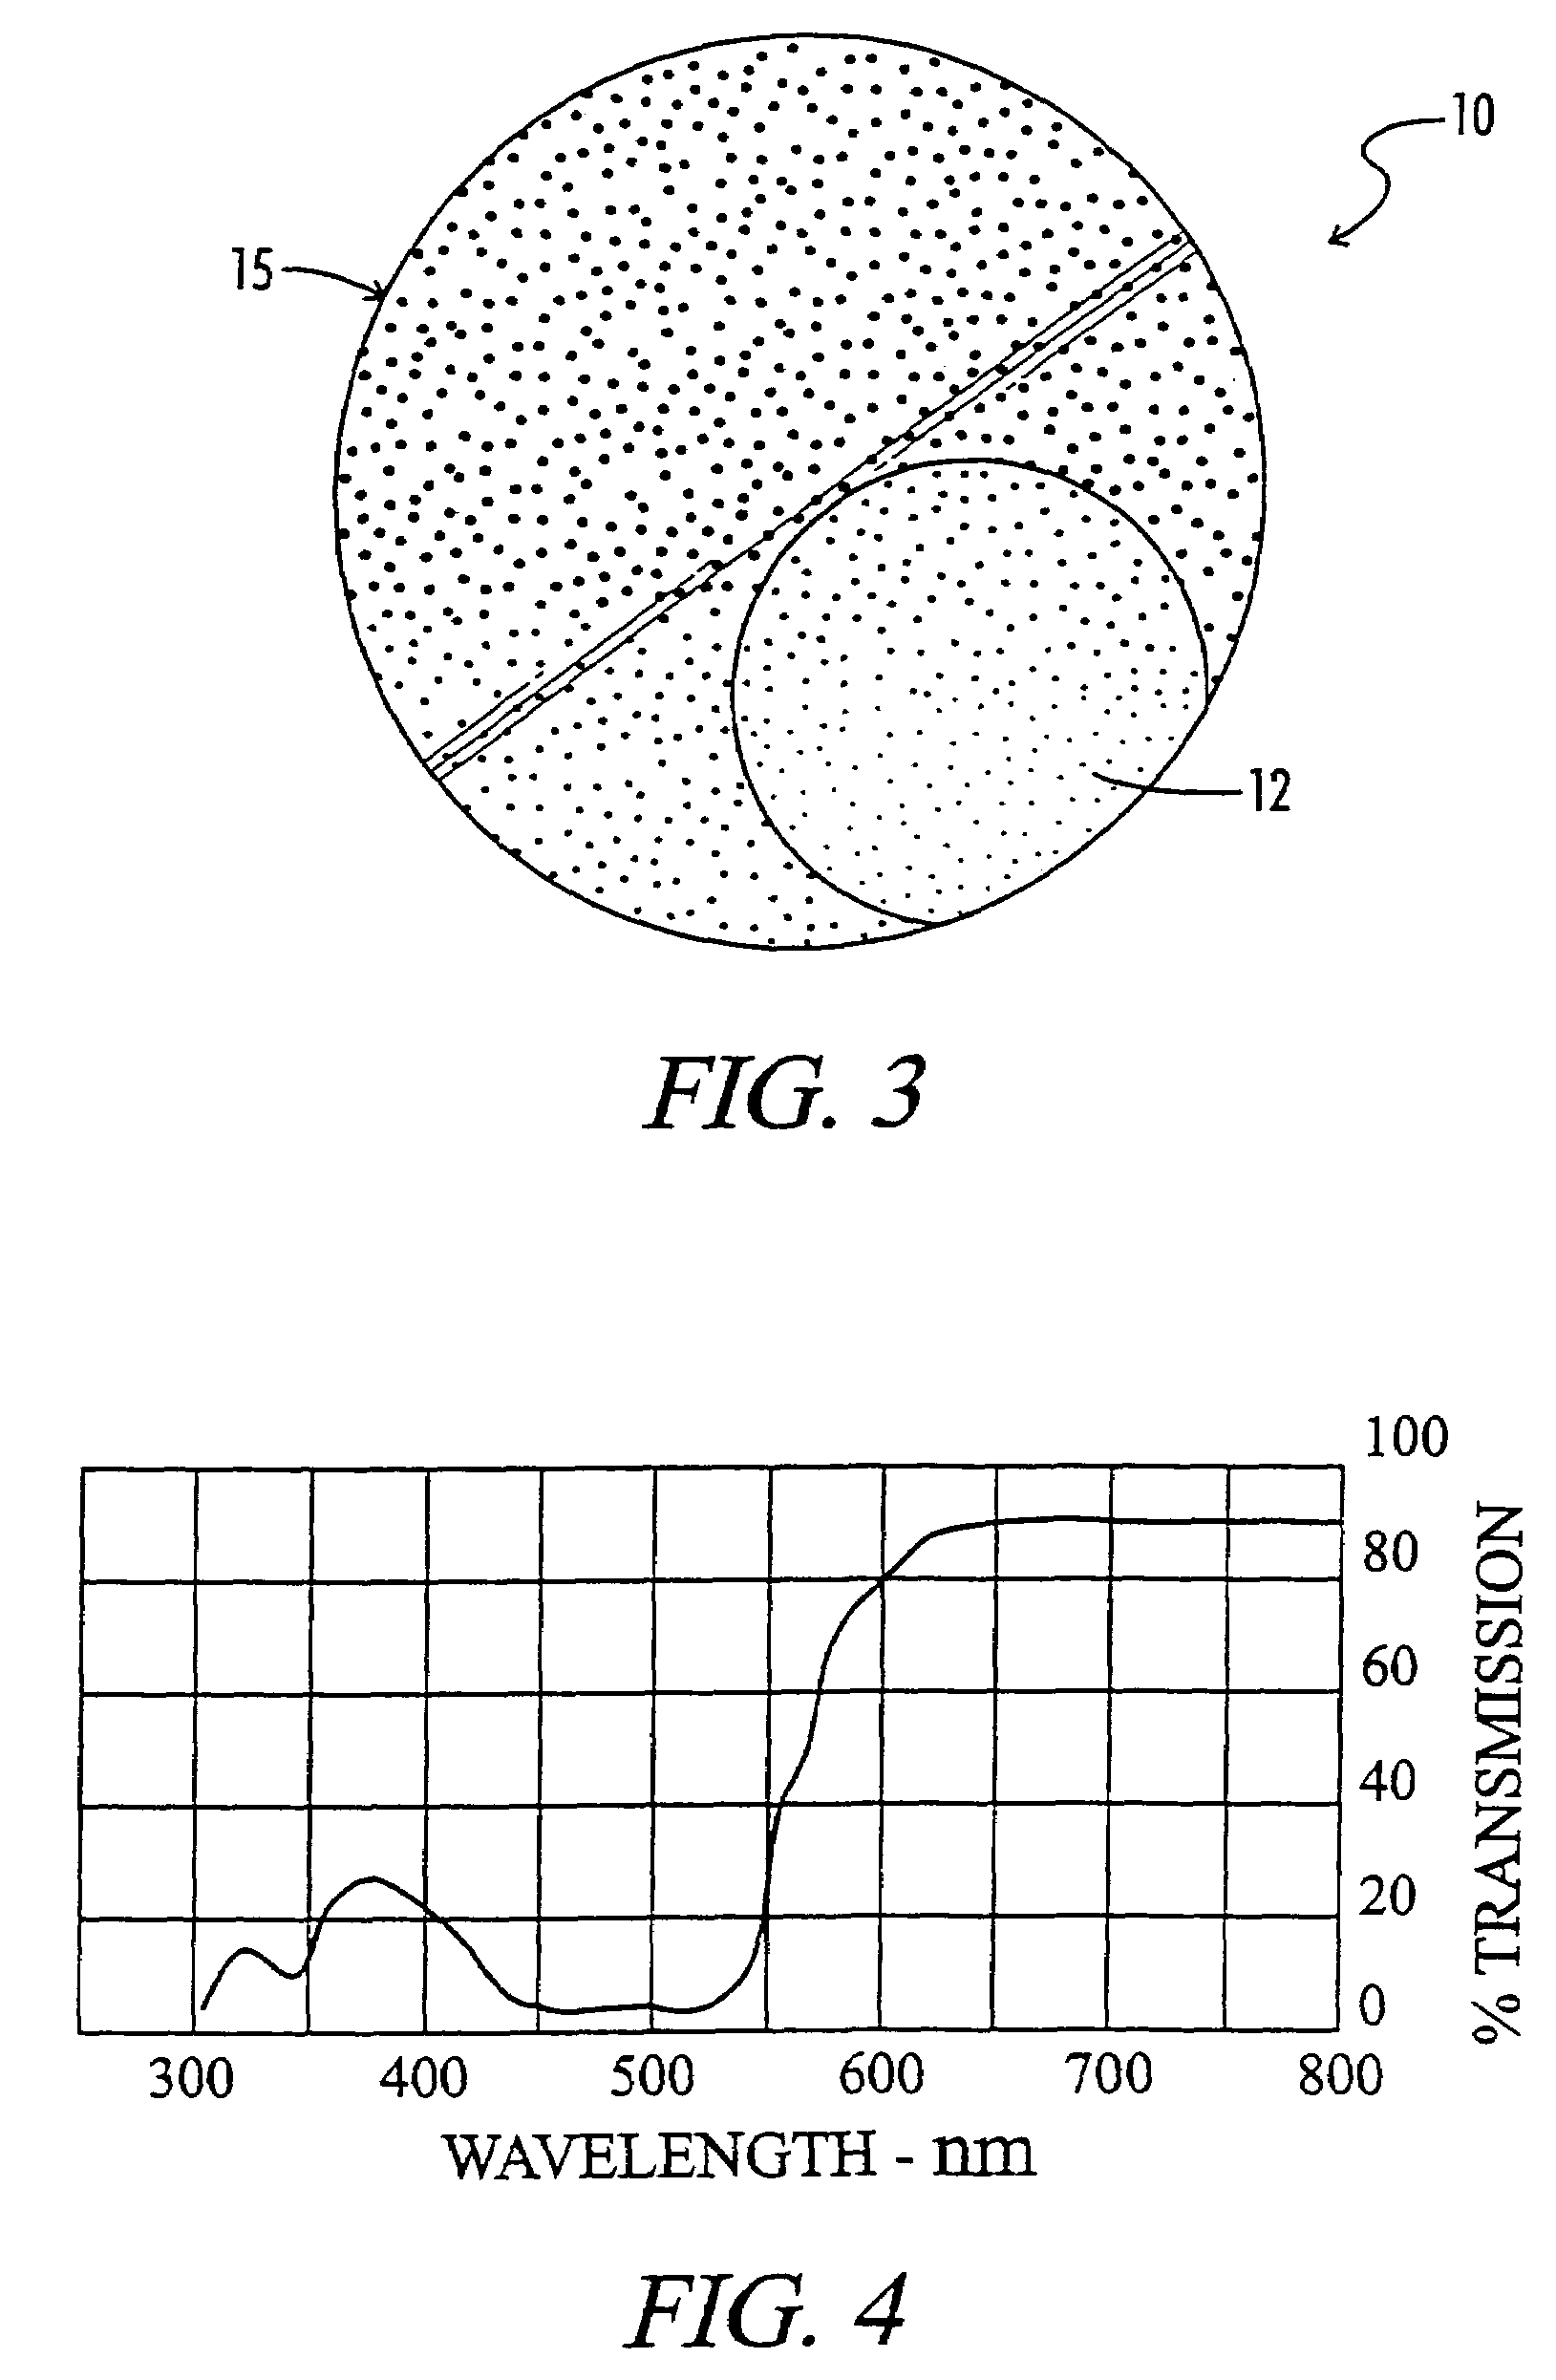 Eyeglass lens with multiple optical zones having varying optical properties for enhanced visualization of different scenes in outdoor recreational activities